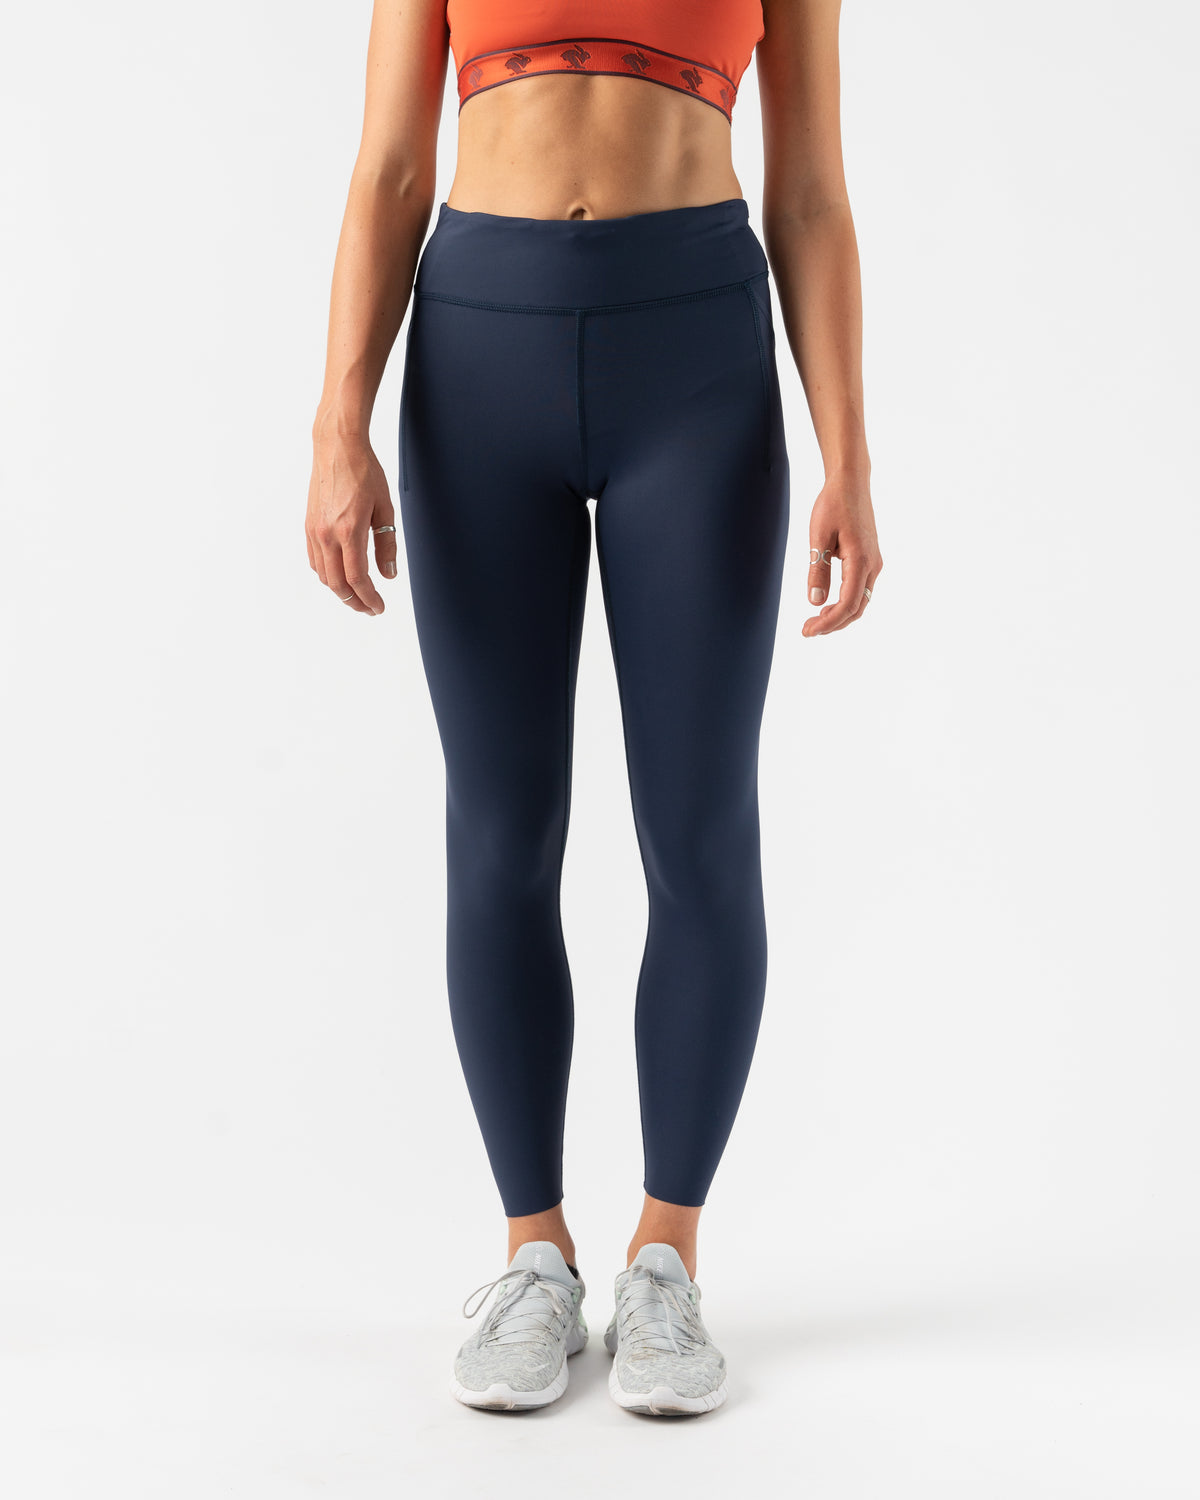 NWT Lululemon Align High-Rise Pant with Pockets 25~SIZE:0,2,4~Icing Blue